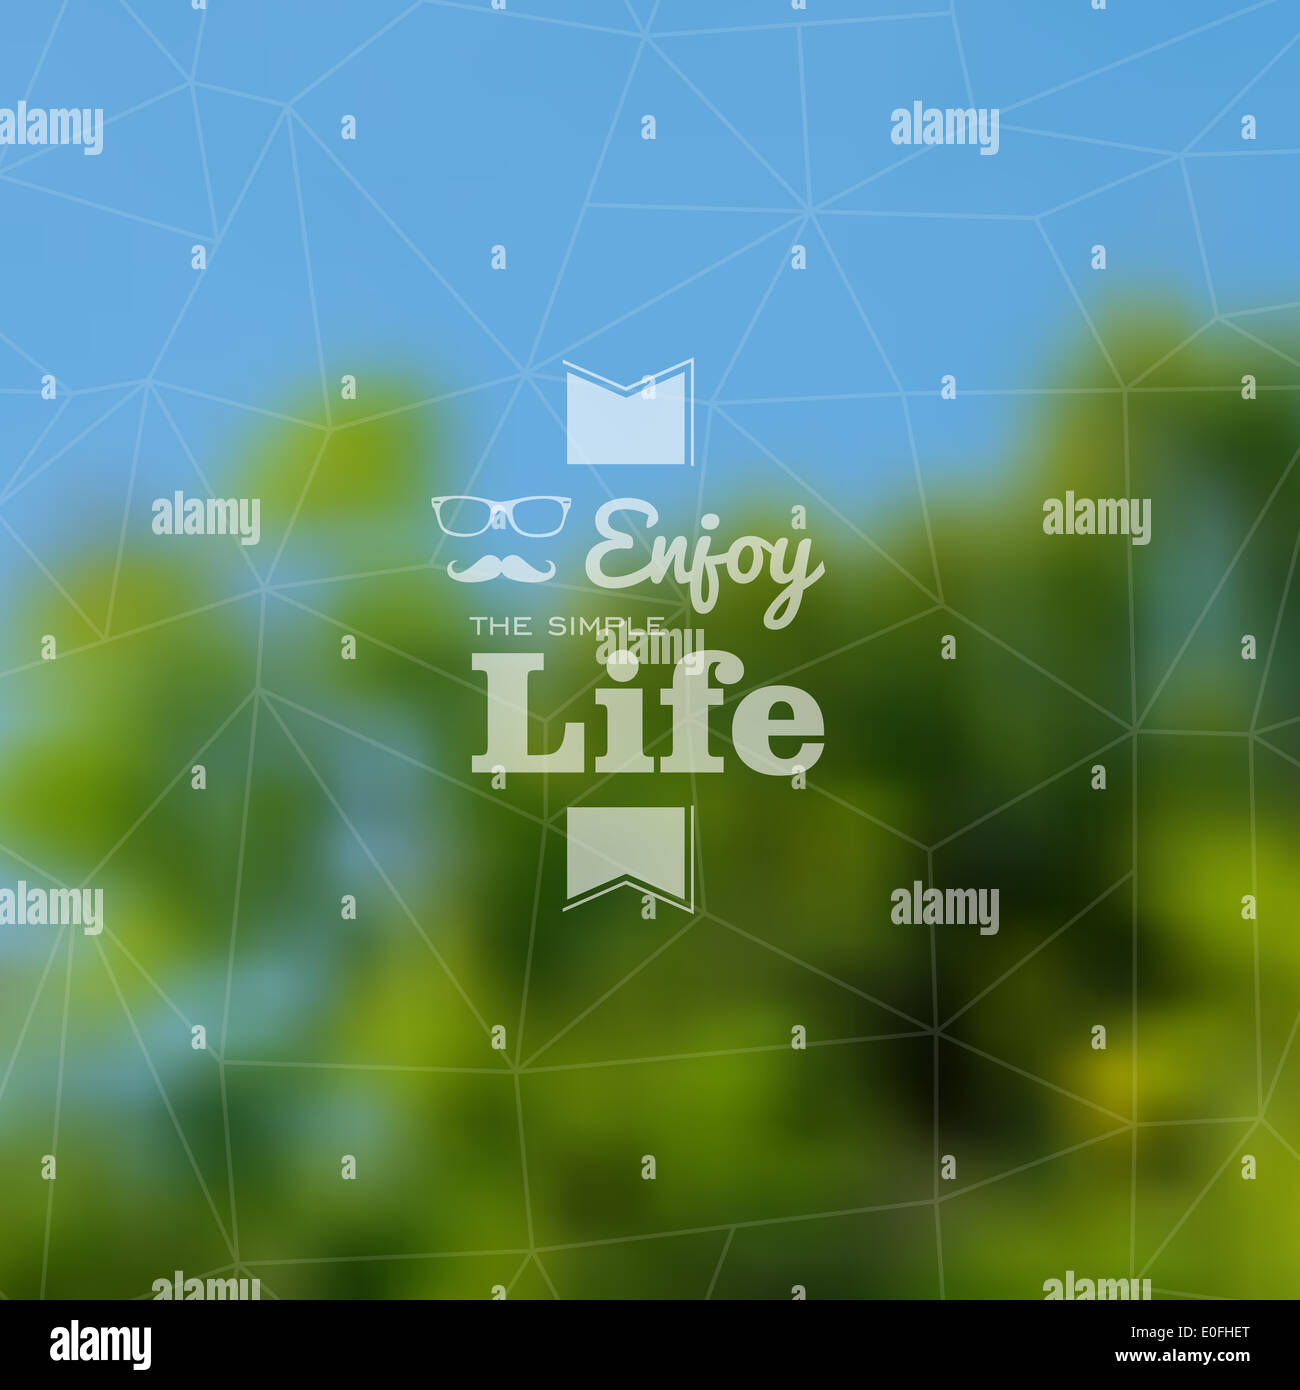 Enjoy life quote over blur nature background of tree in a park. Stock Photo